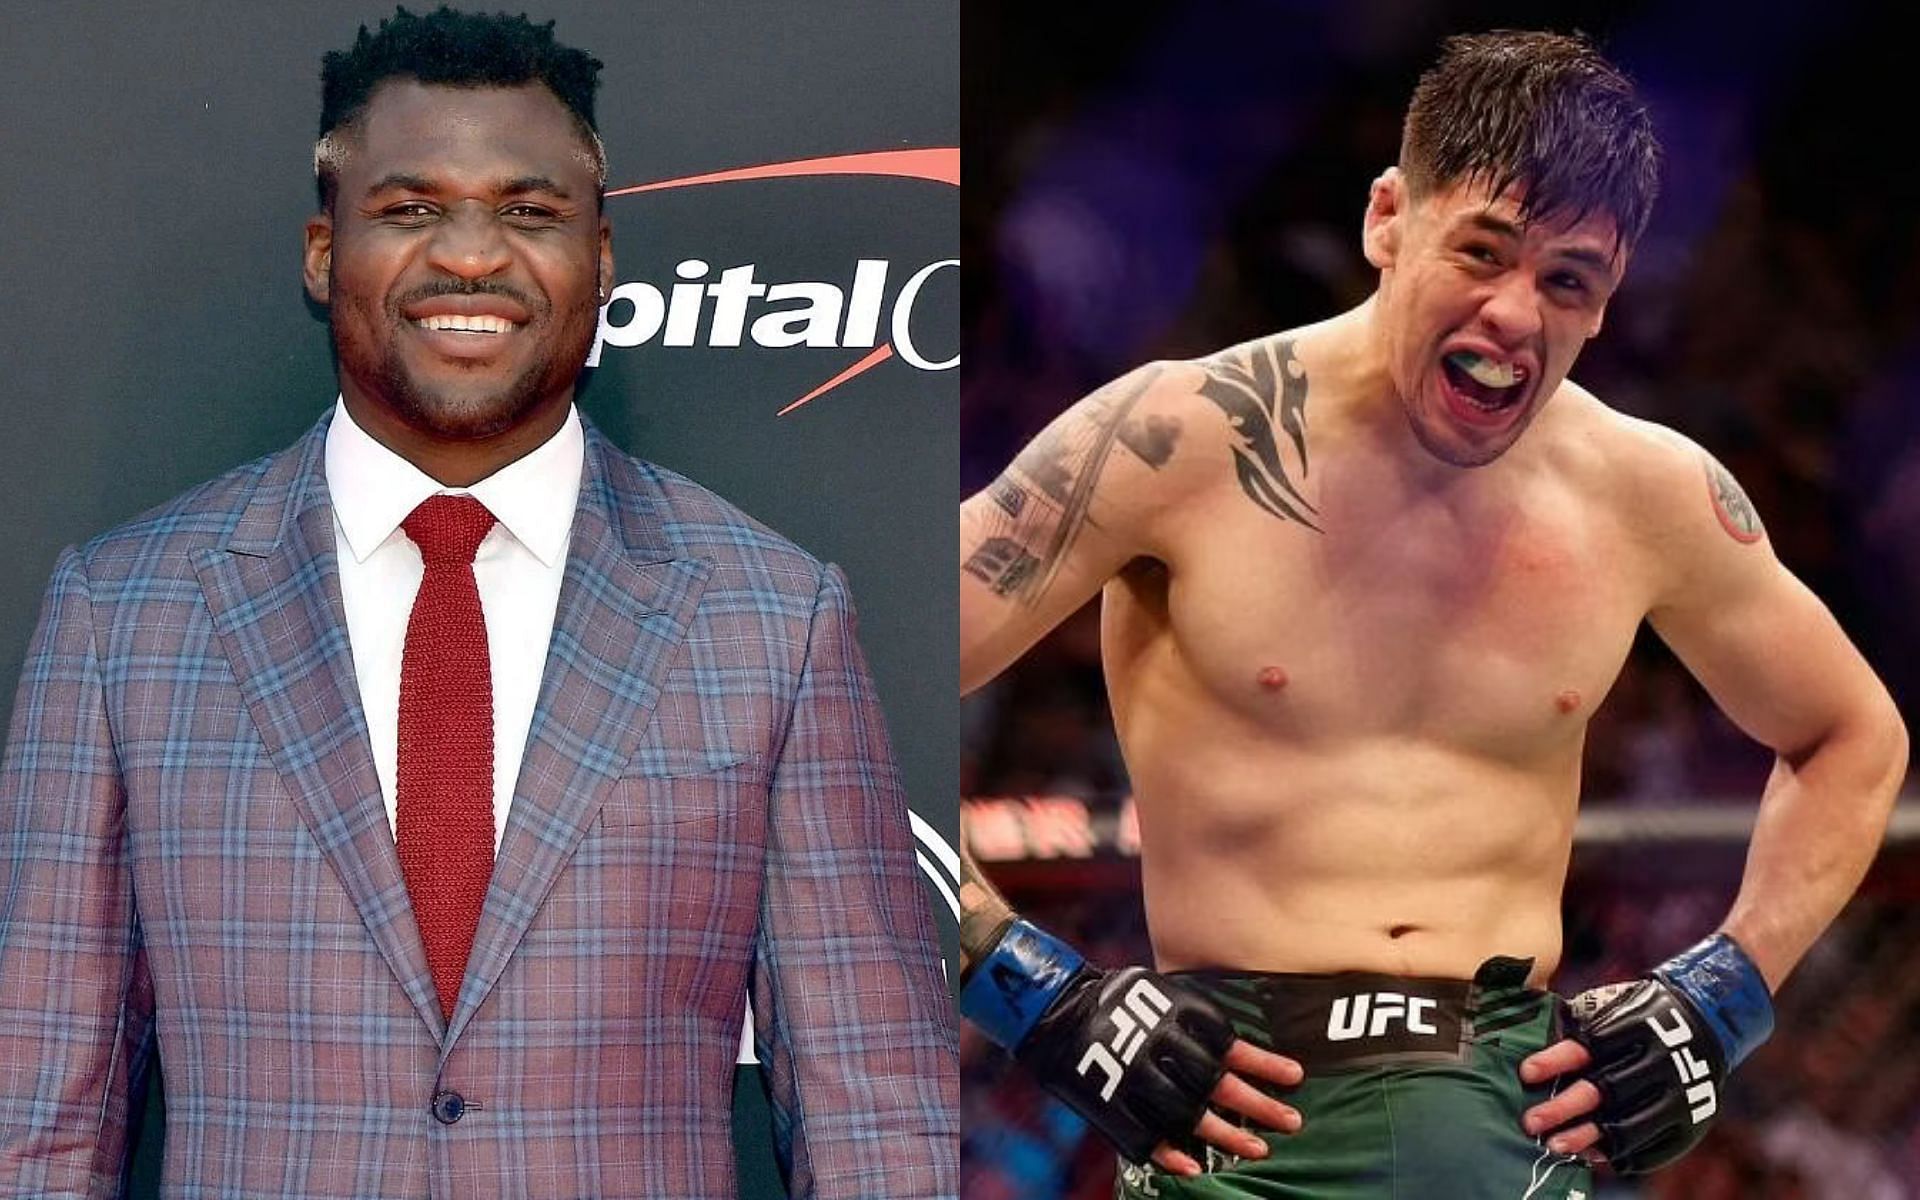 Watch: Francis Ngannou hilariously offers to be Brandon Moreno's bodyguard ahead of UFC 270 press conference